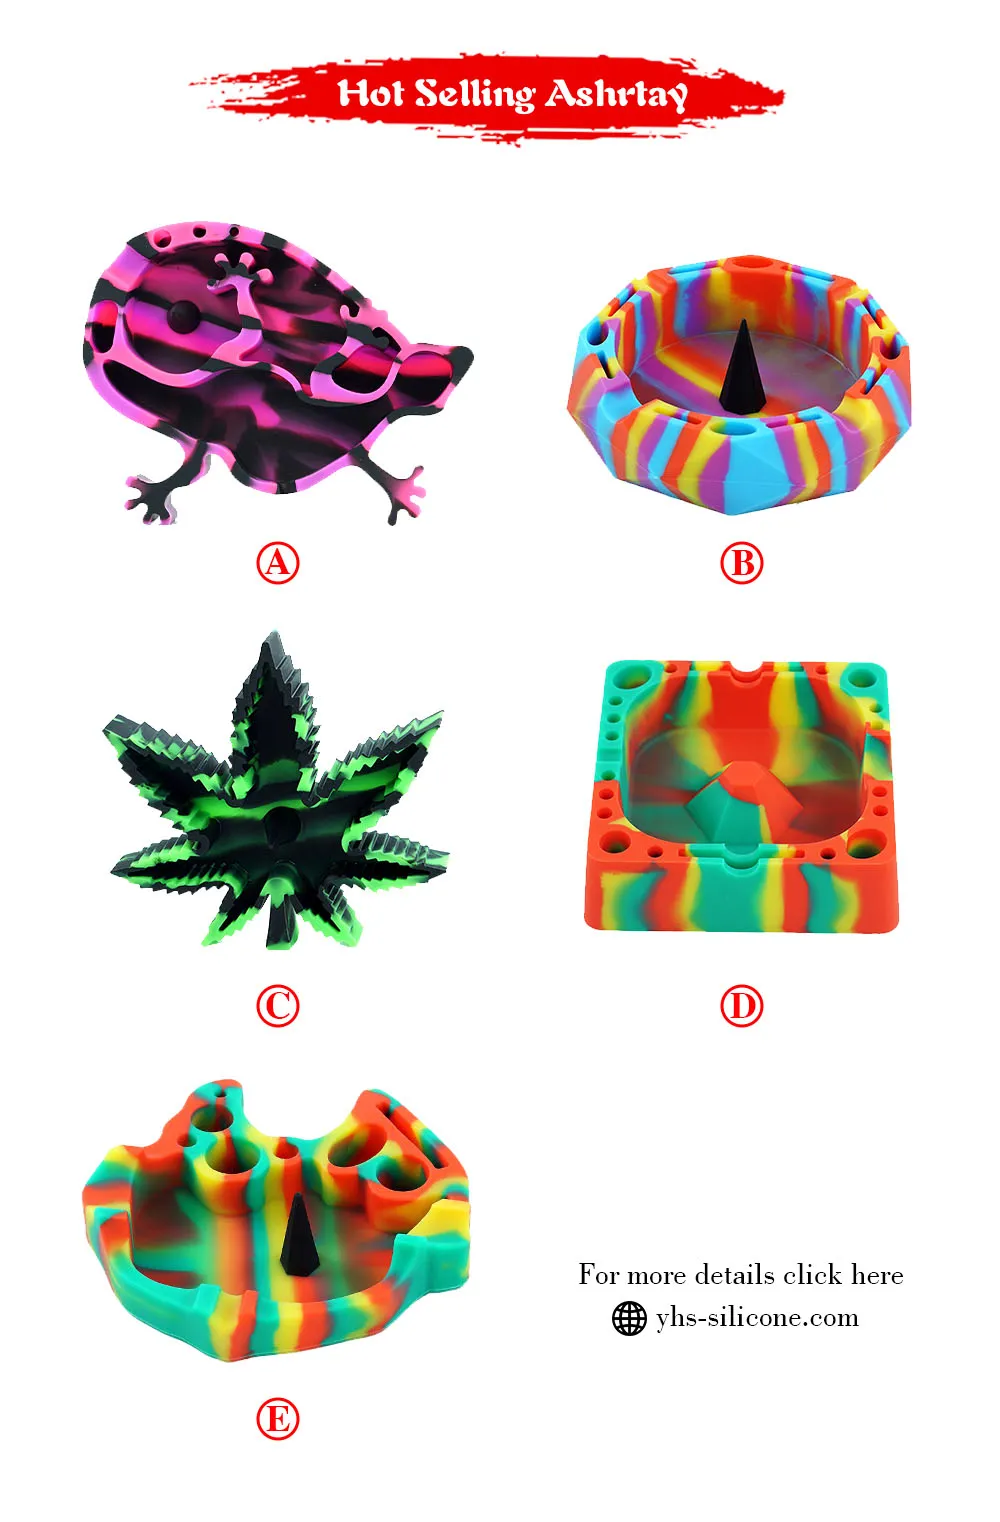 5 different style silicone ashtray cigarette holder case colorful pattern office home tabletop heat resistant to high temperature